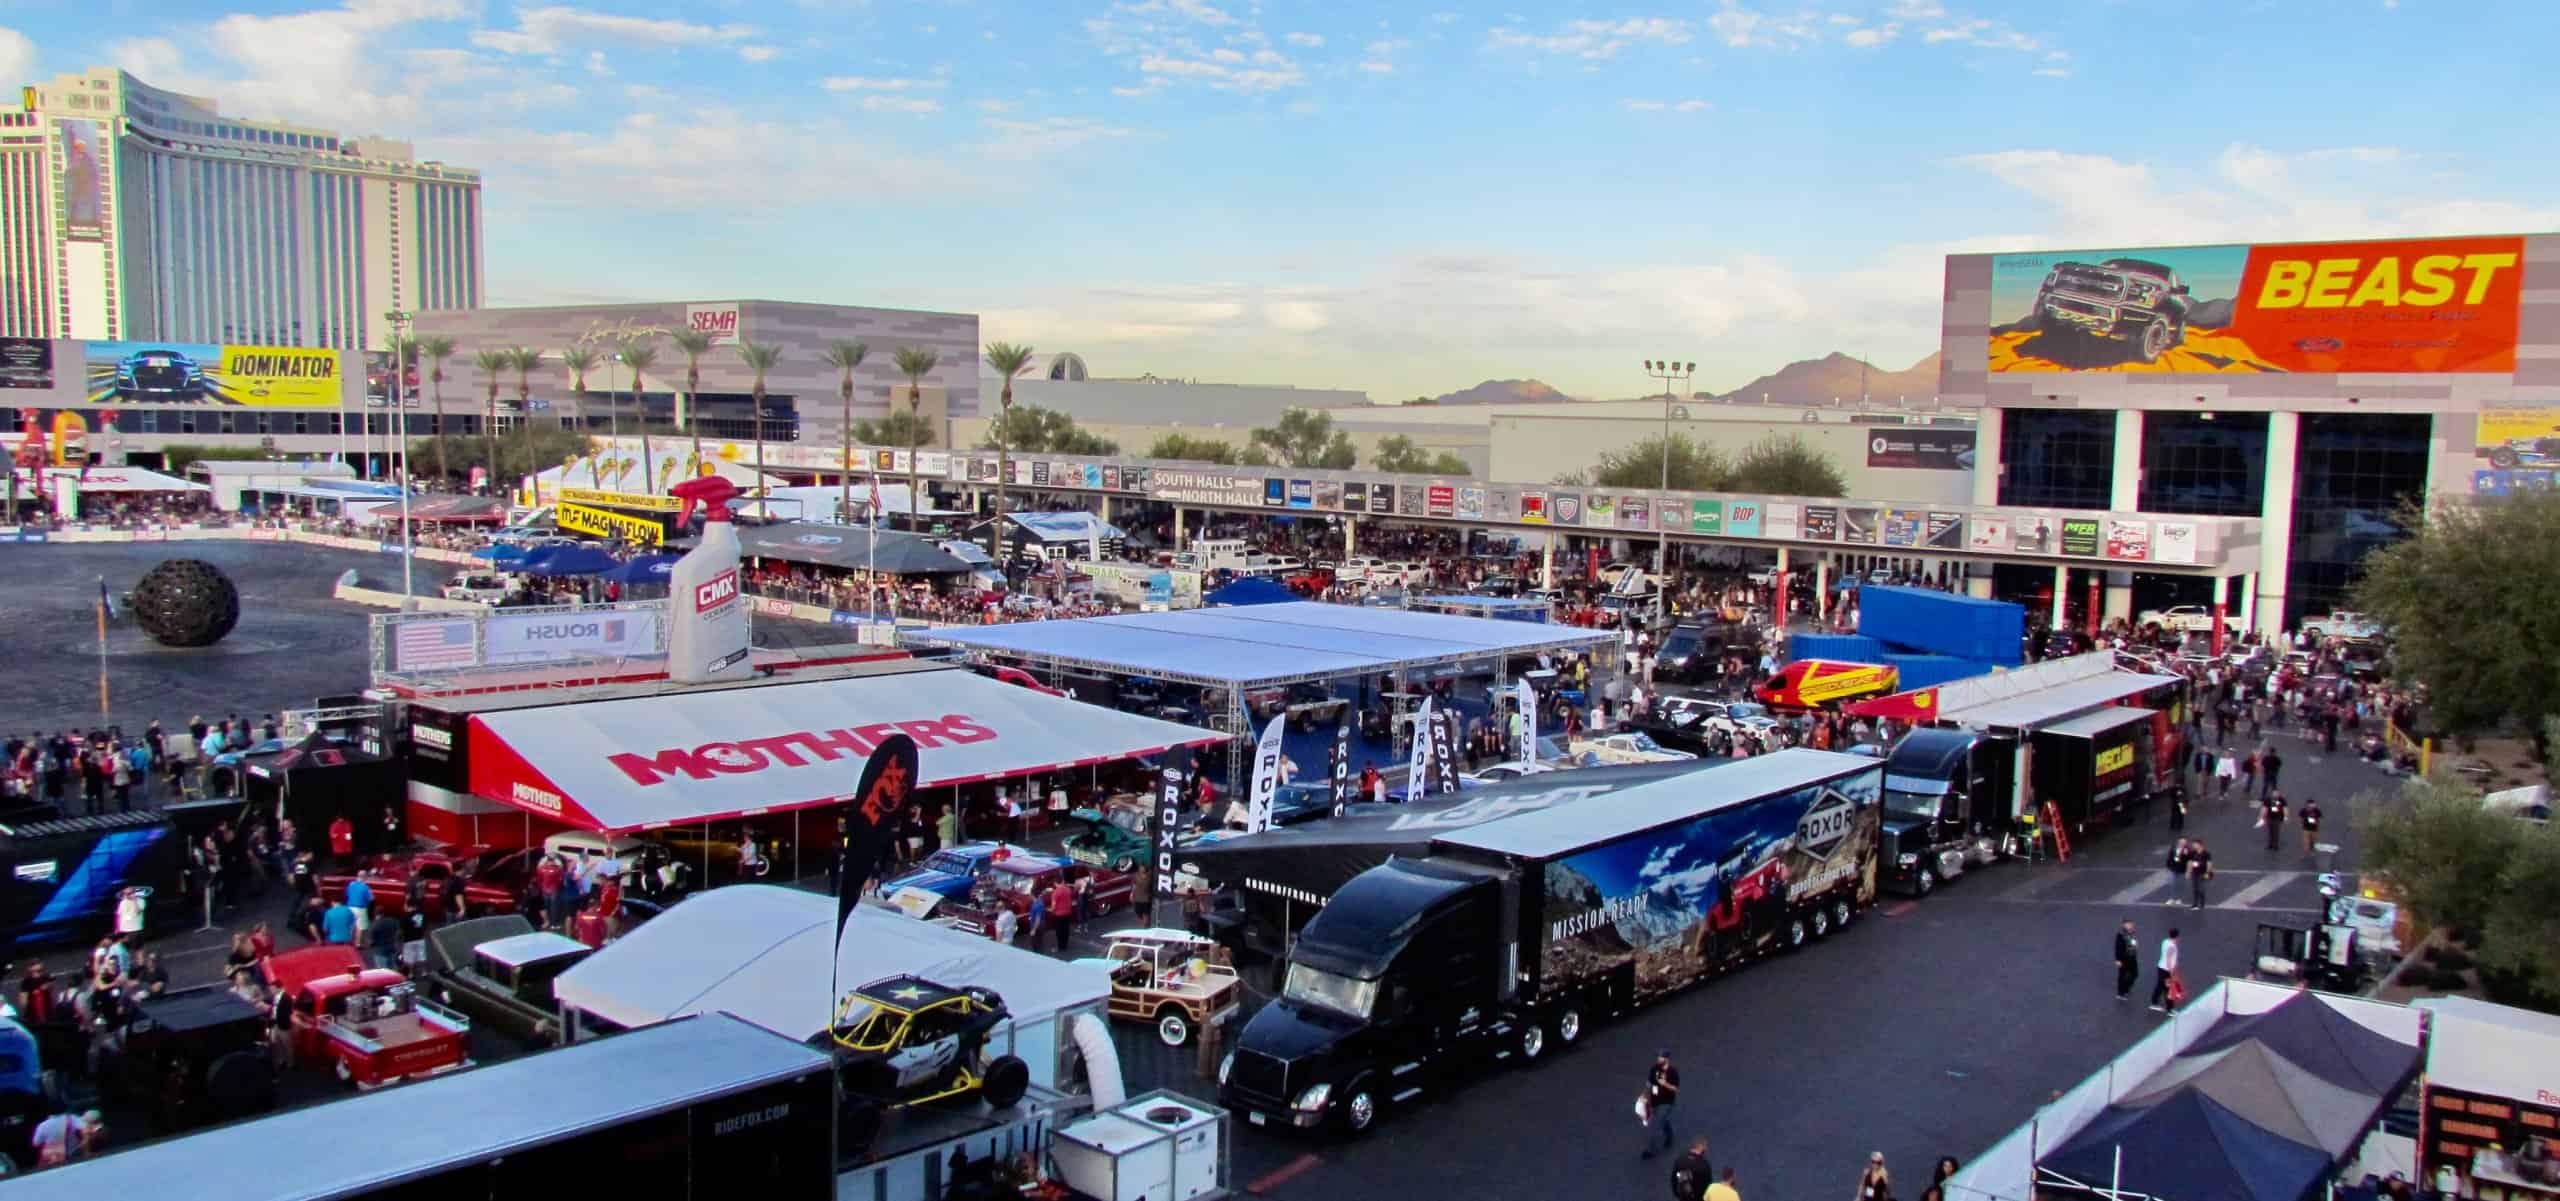 SEMA show, SEMA considering ways to make annual show attendees feel safe, ClassicCars.com Journal